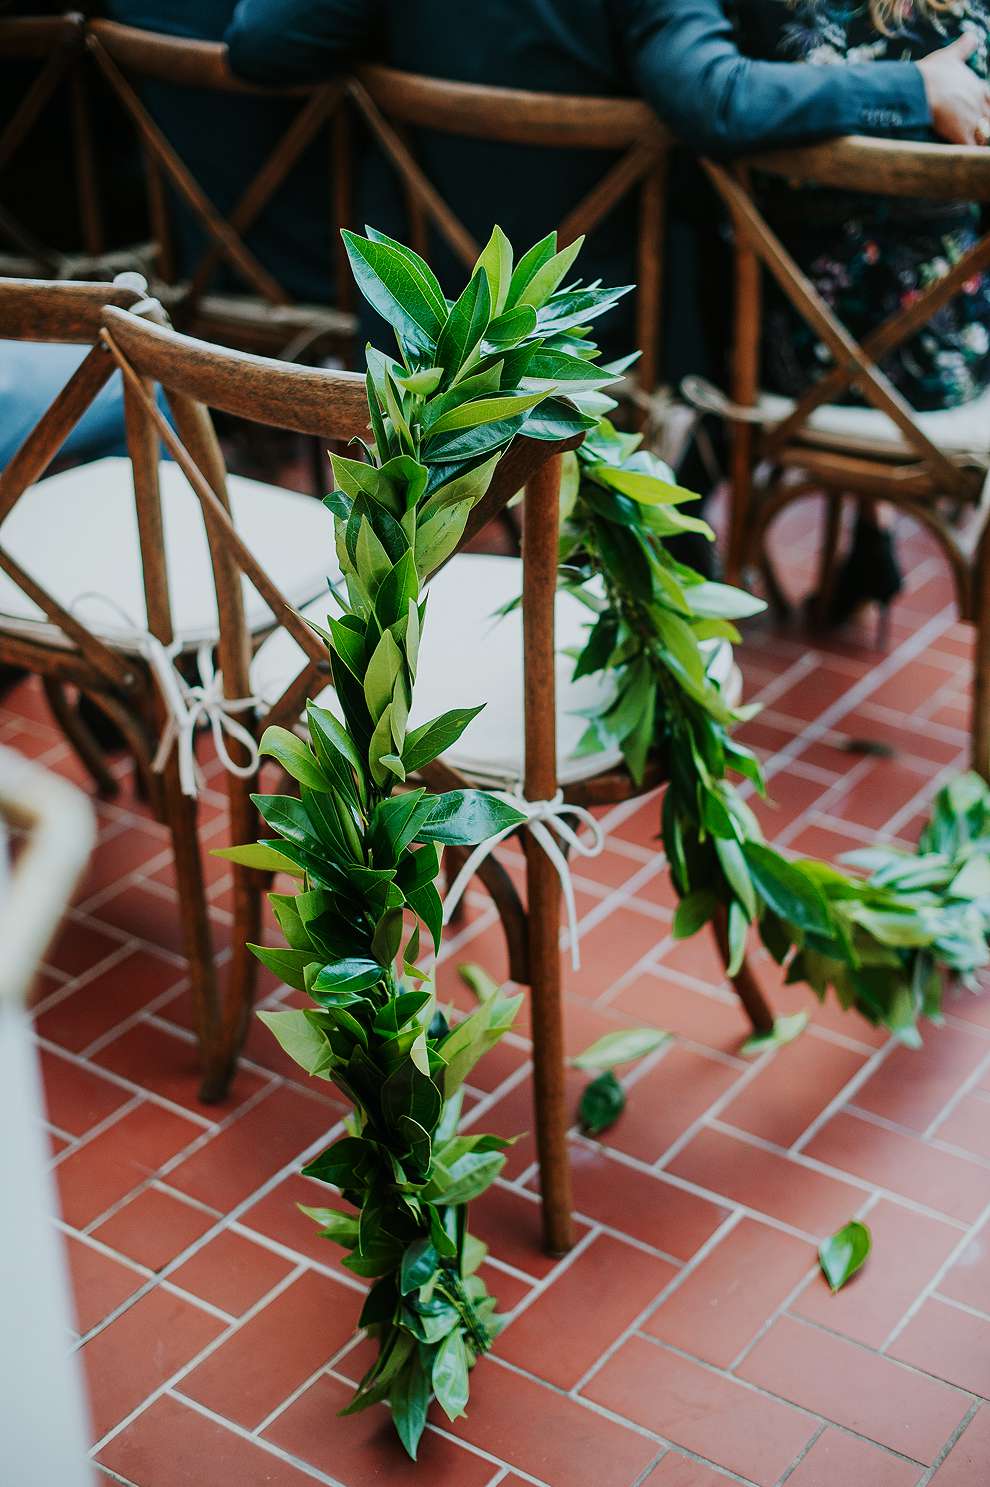 Greenery on ceremony chairs with a red brick floor